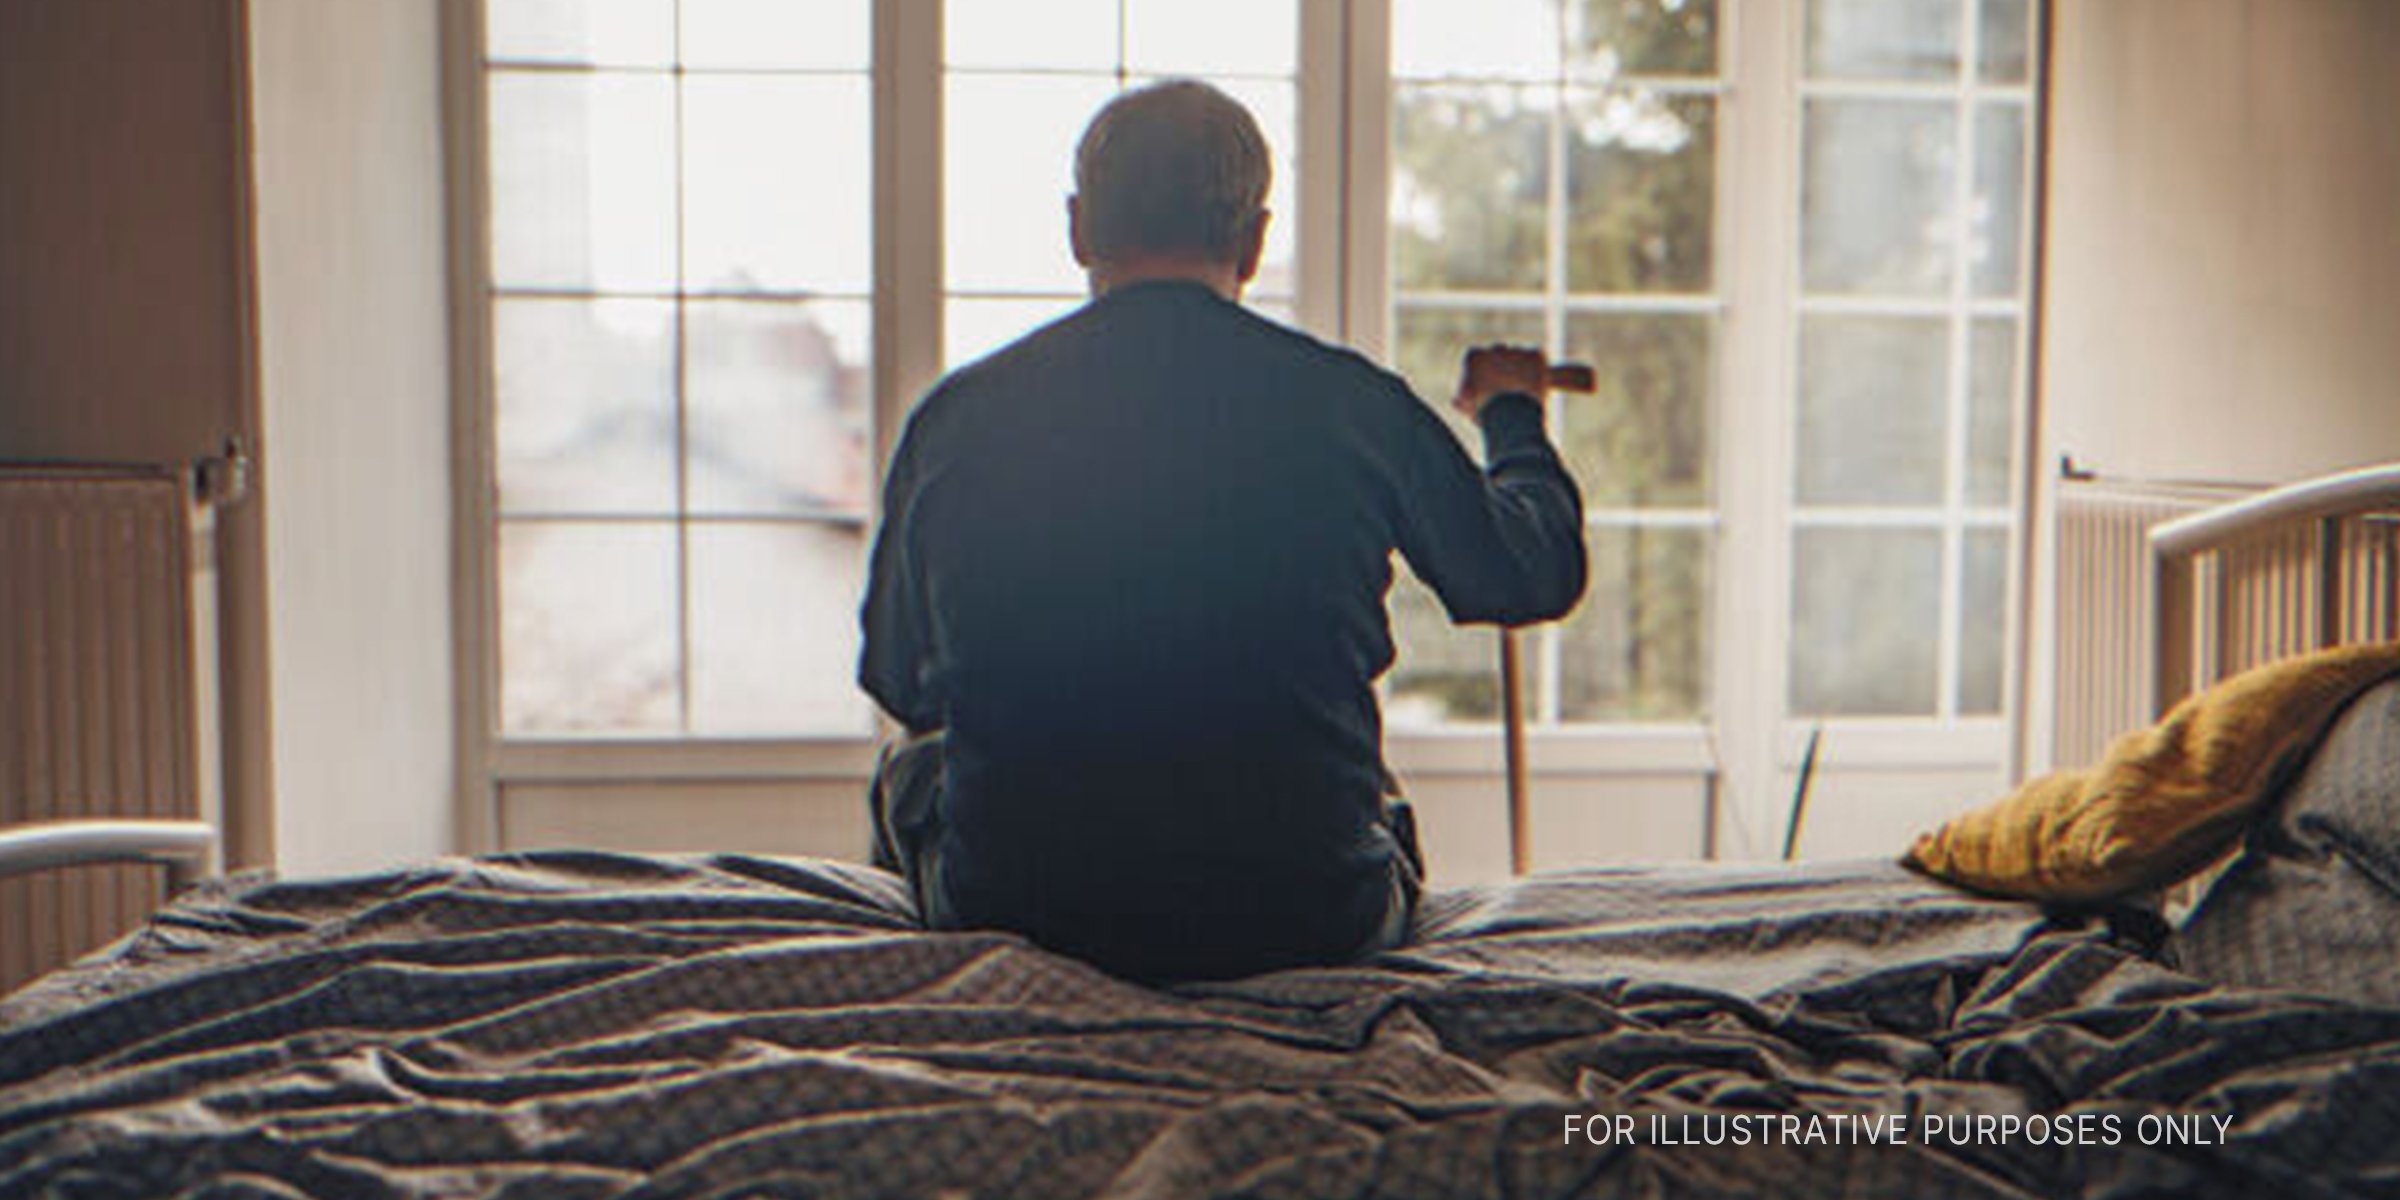 Old man sitting in a bed, staring out the window | Source: Getty Images